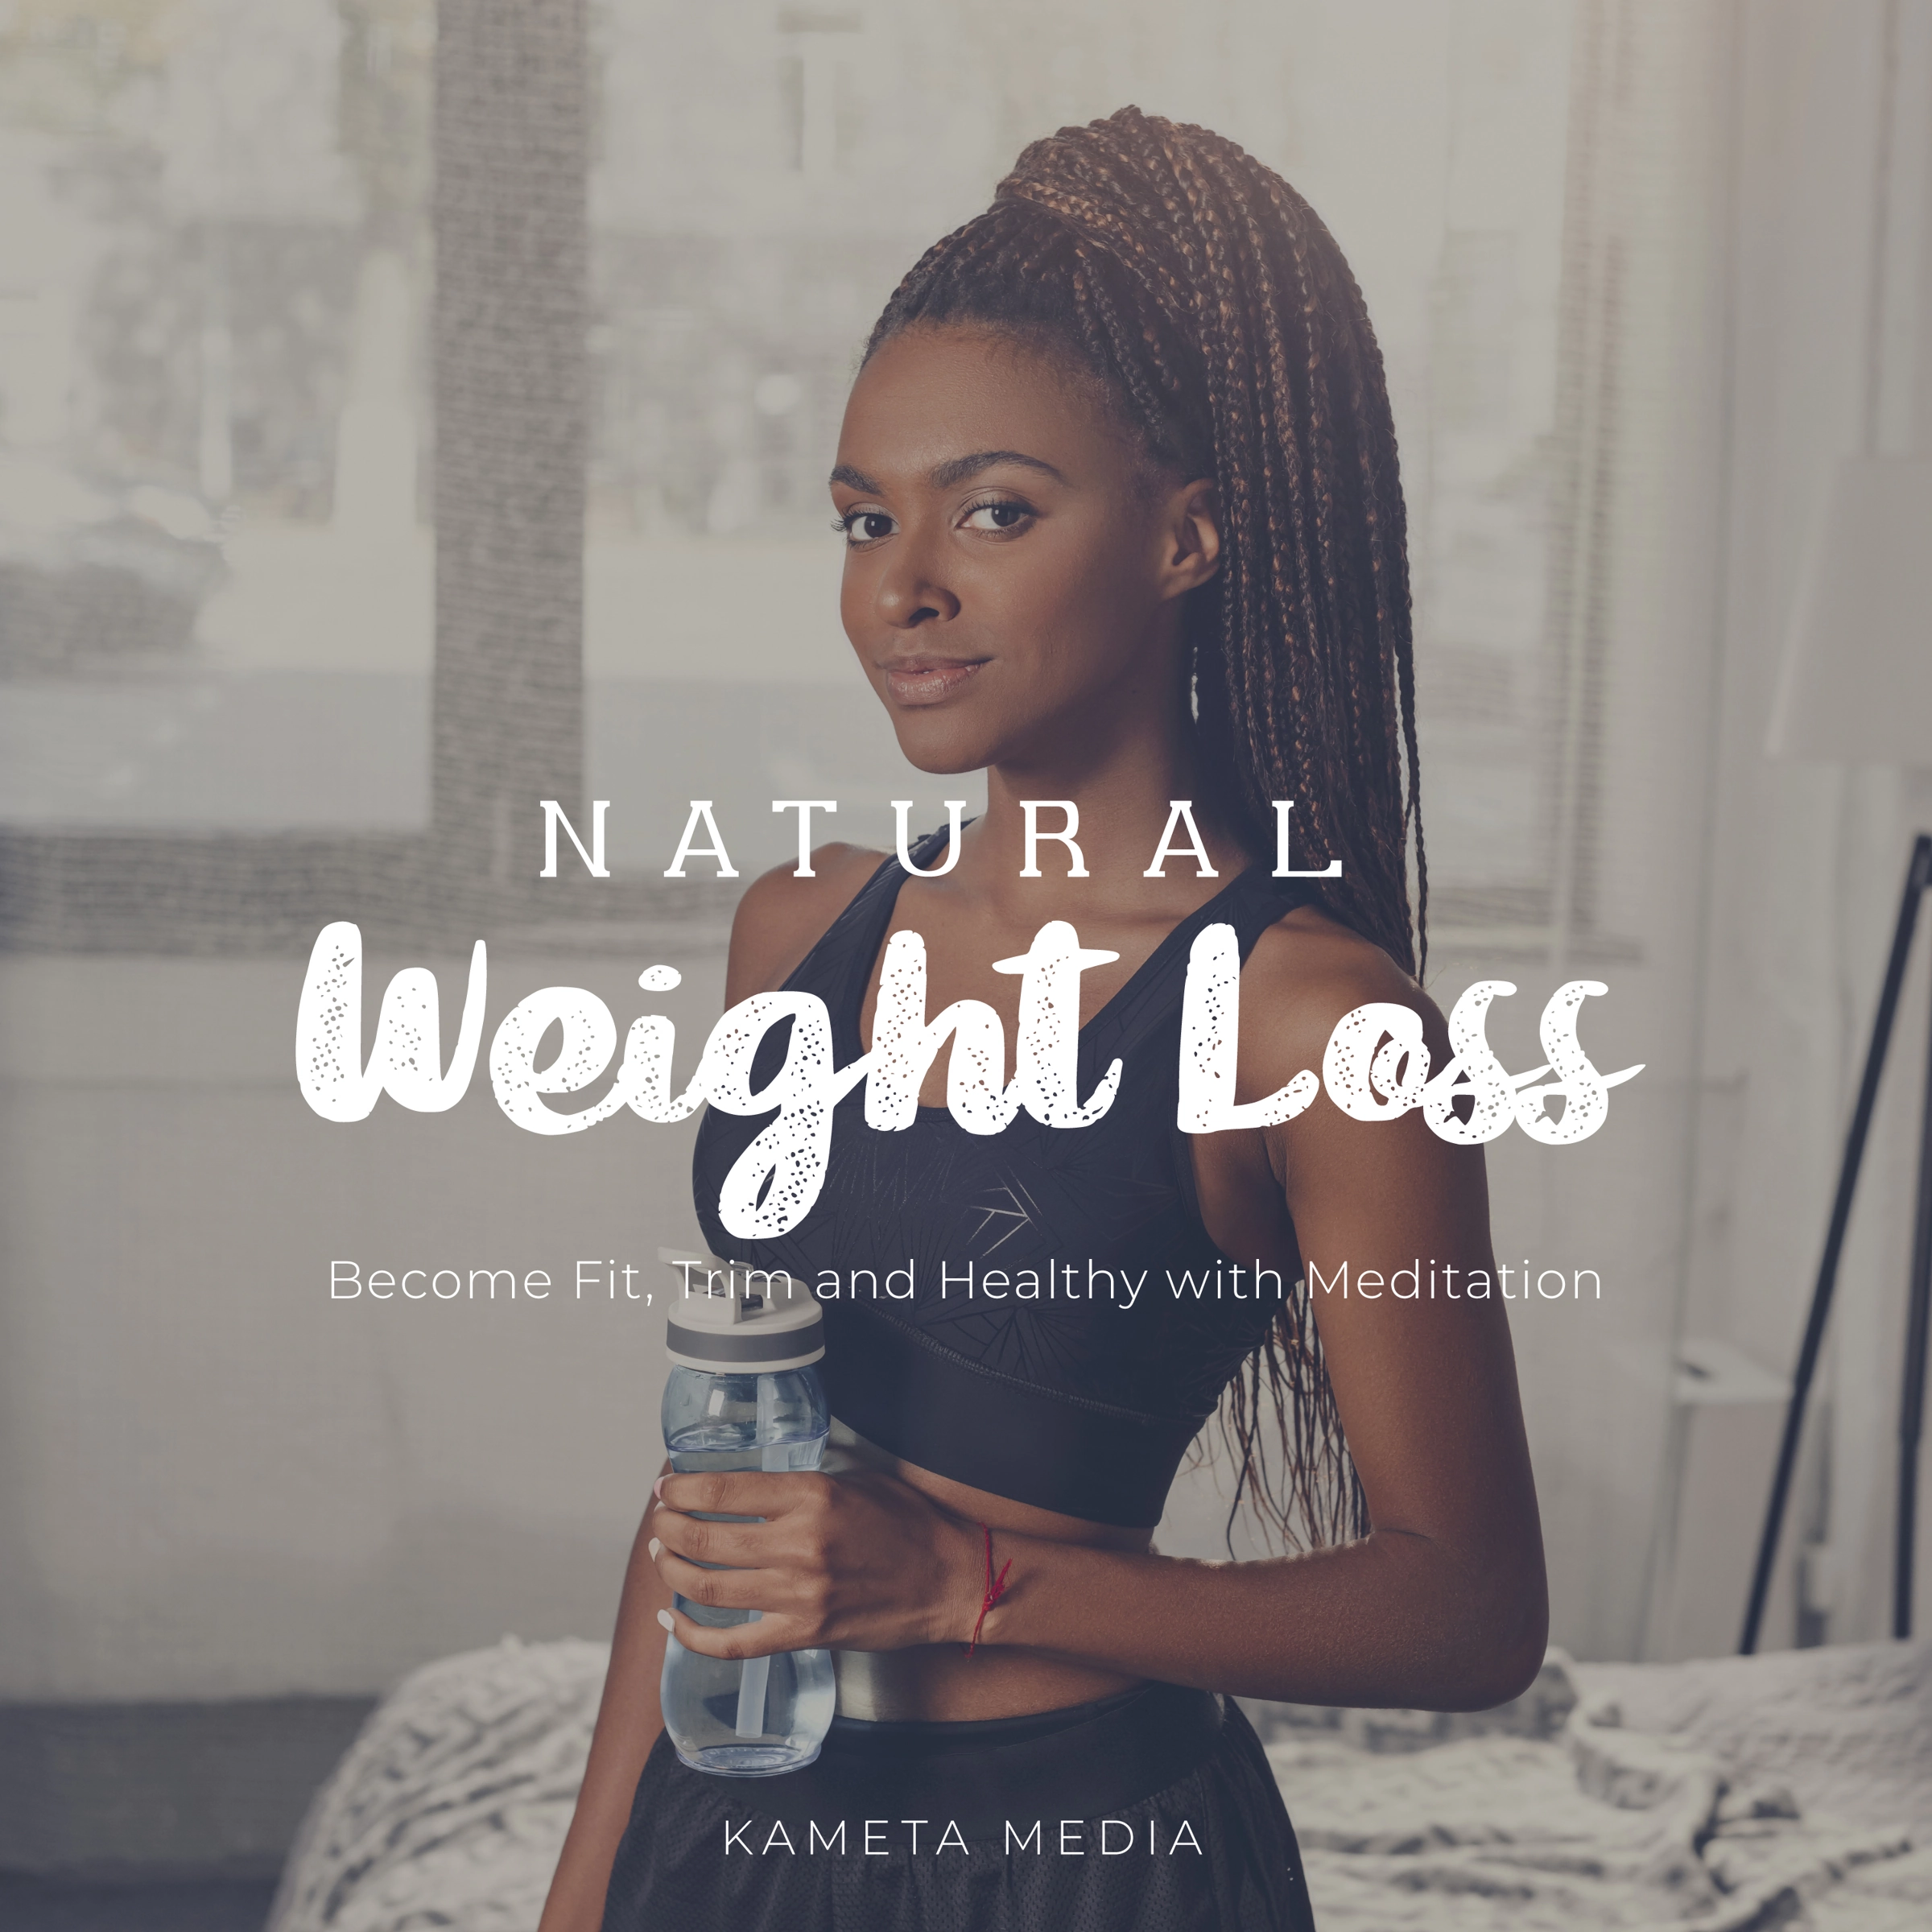 Natural Weight Loss: Become Fit, Trim and Healthy with Meditation Audiobook by Kameta Media